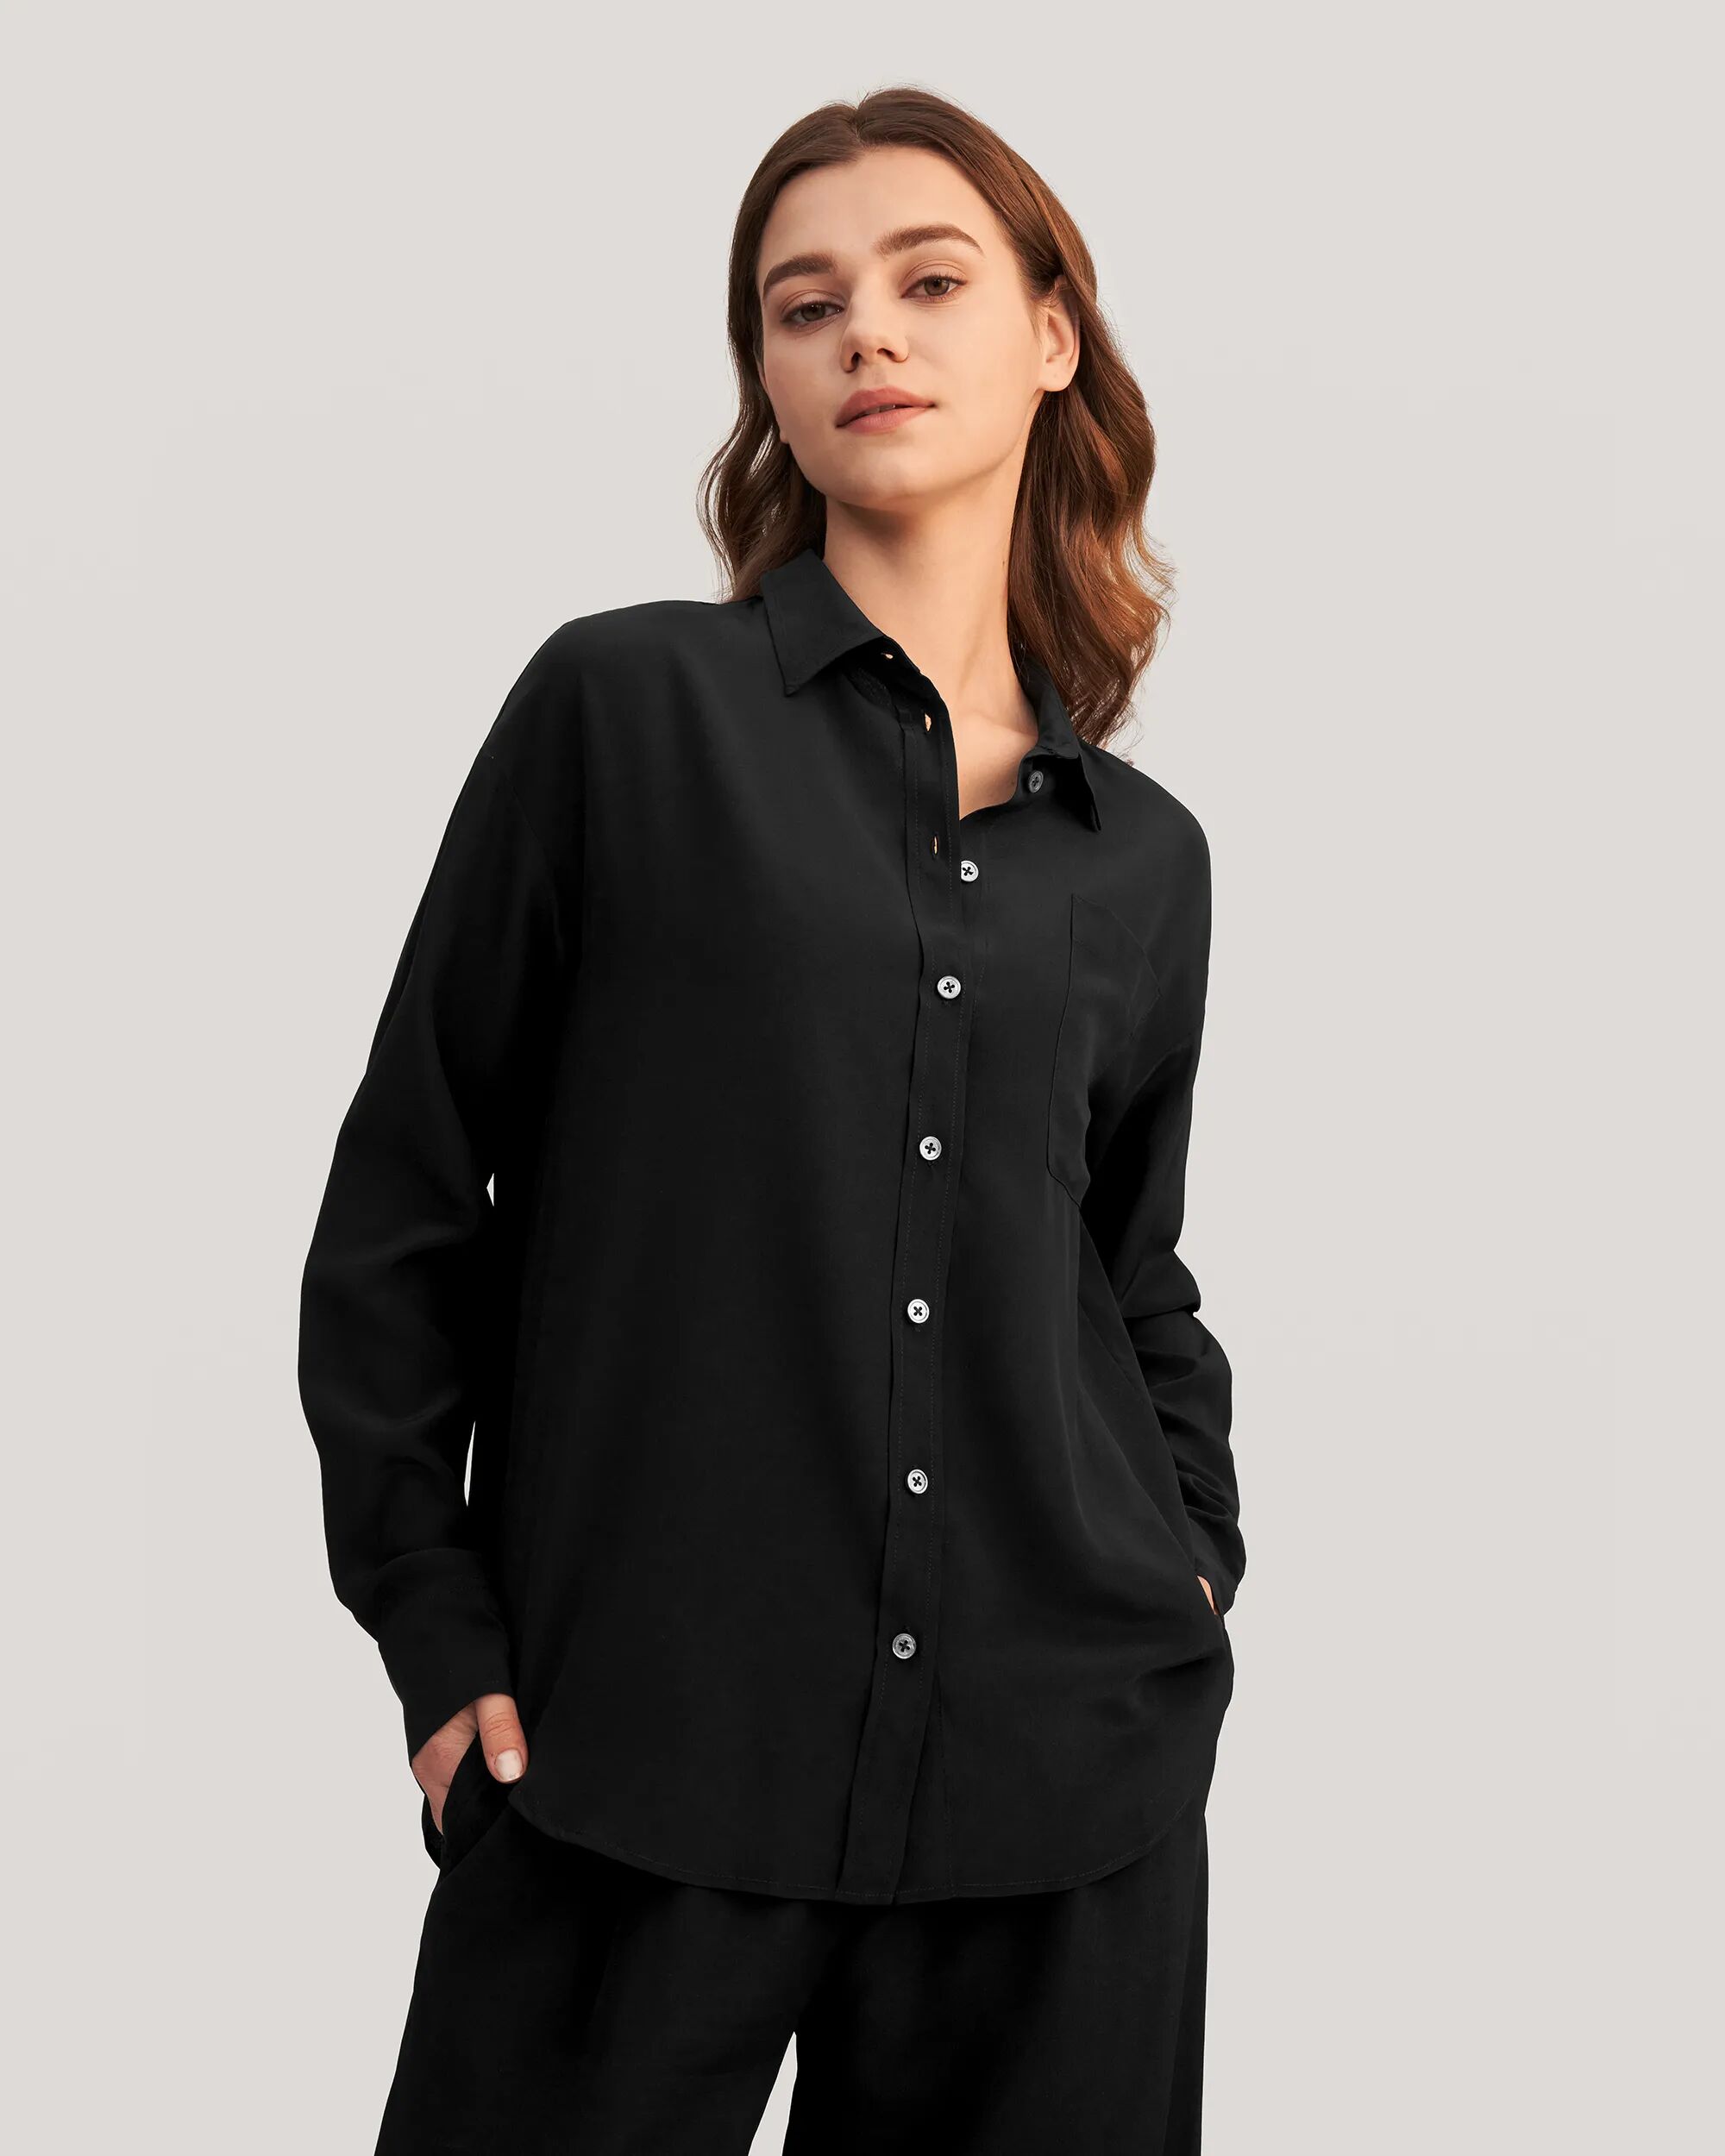 LILYSILK Business Black Shirt   Silk Plain   Women Crepe De Chine Relaxed Fit Pocket On The Chest XL